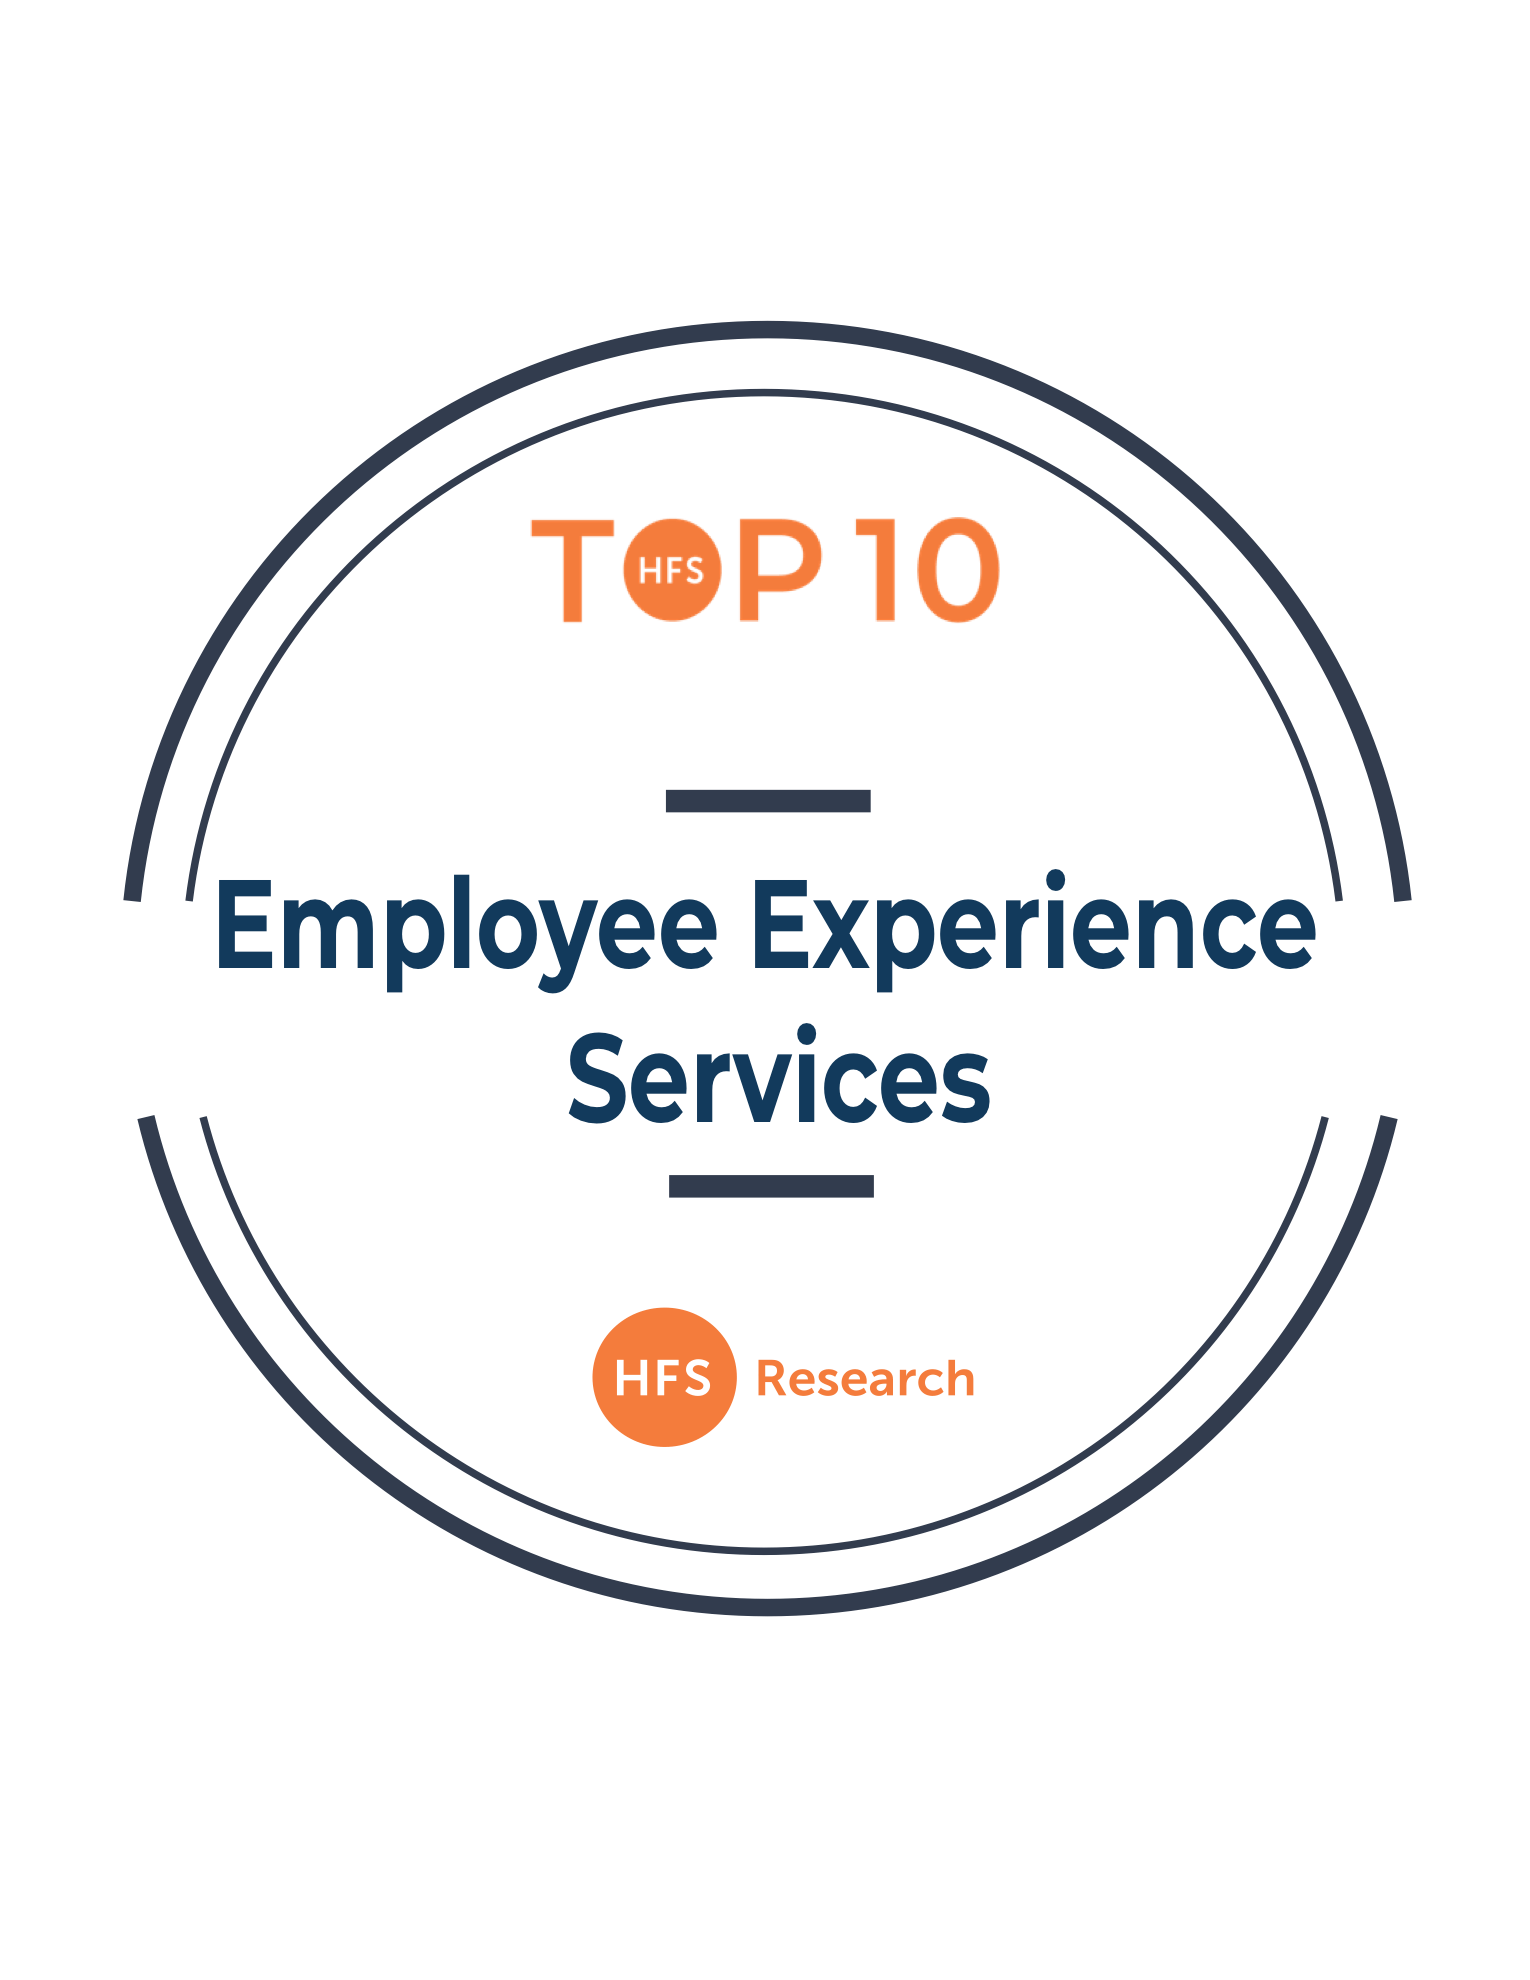 Top 10 Employee Experience Services